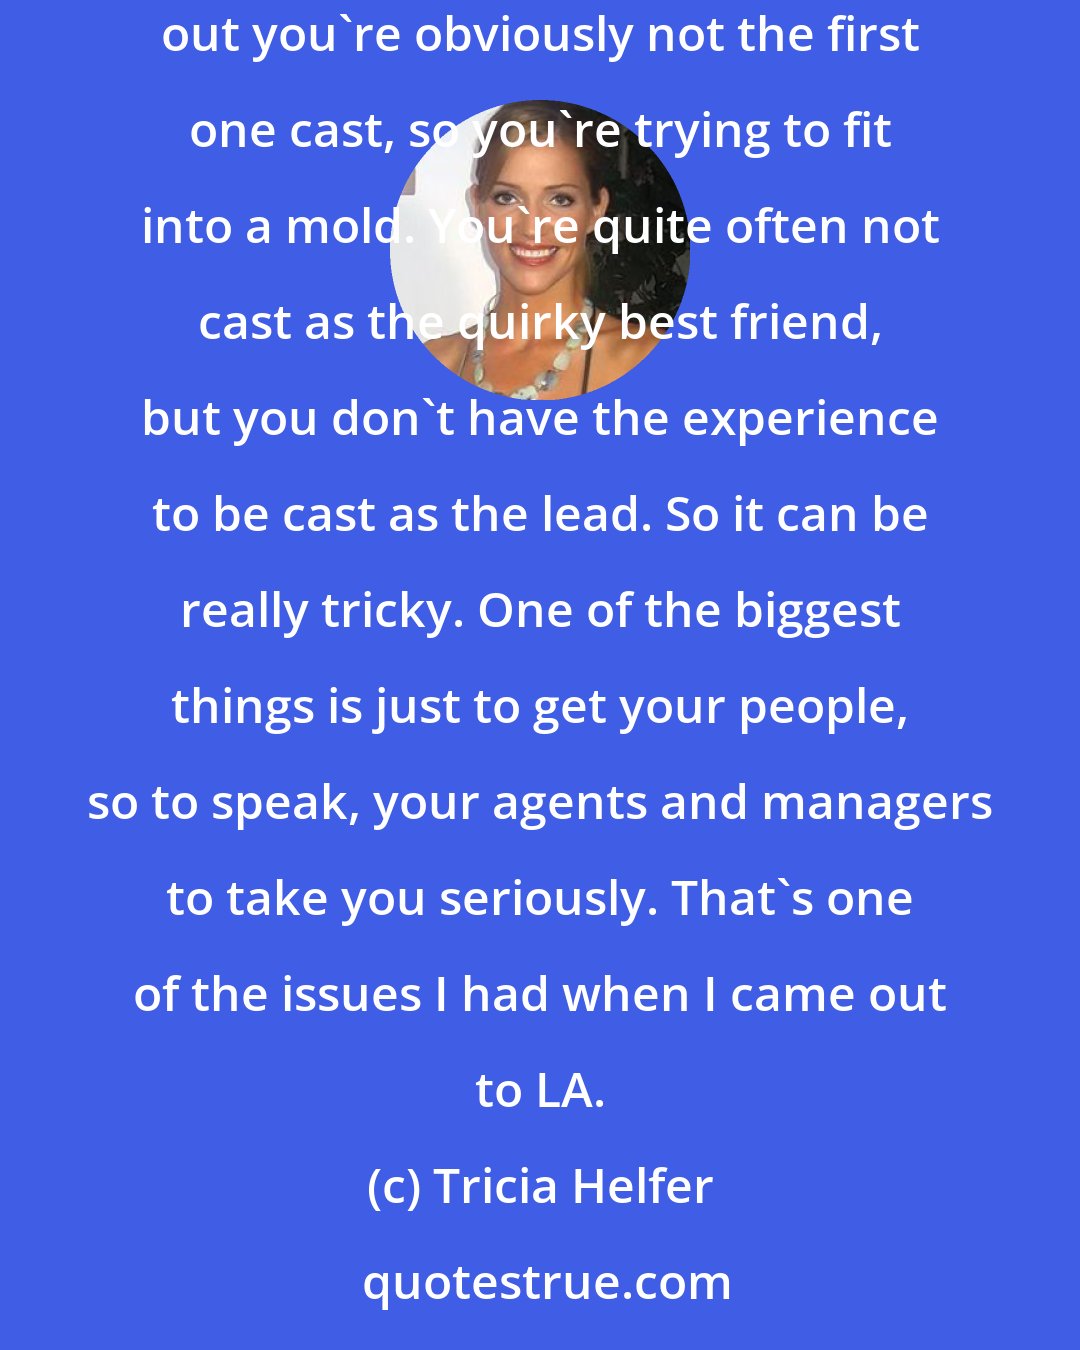 Tricia Helfer: Models have a stigma that they can't act. You're also, to be quite blunt, you're tall and not a lot of actors are tall and when you are starting out you're obviously not the first one cast, so you're trying to fit into a mold. You're quite often not cast as the quirky best friend, but you don't have the experience to be cast as the lead. So it can be really tricky. One of the biggest things is just to get your people, so to speak, your agents and managers to take you seriously. That's one of the issues I had when I came out to LA.